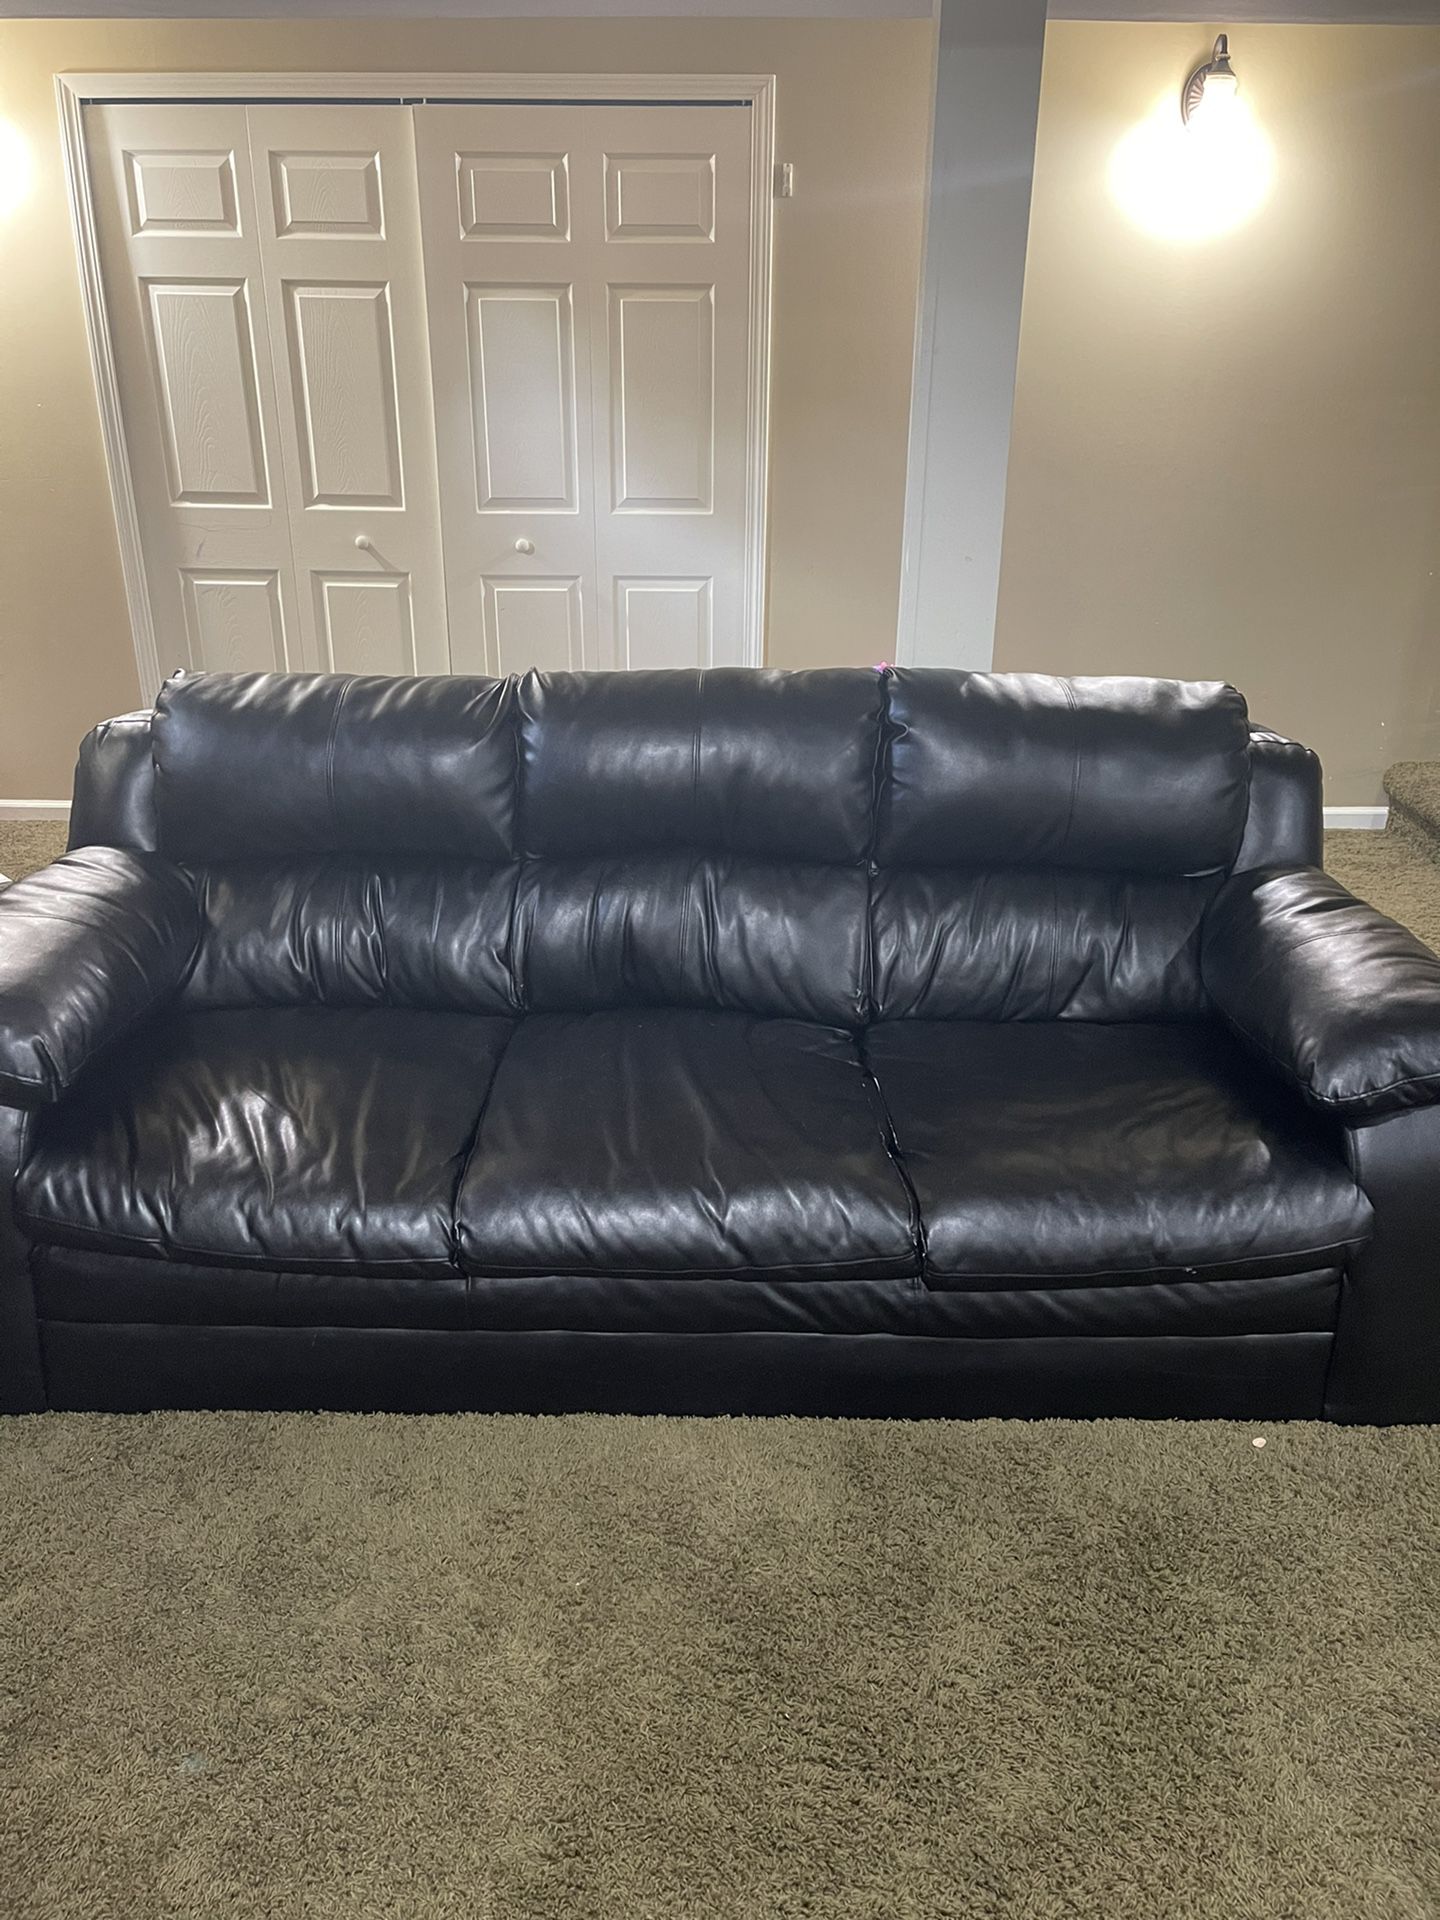 Two leather sofa and one chair